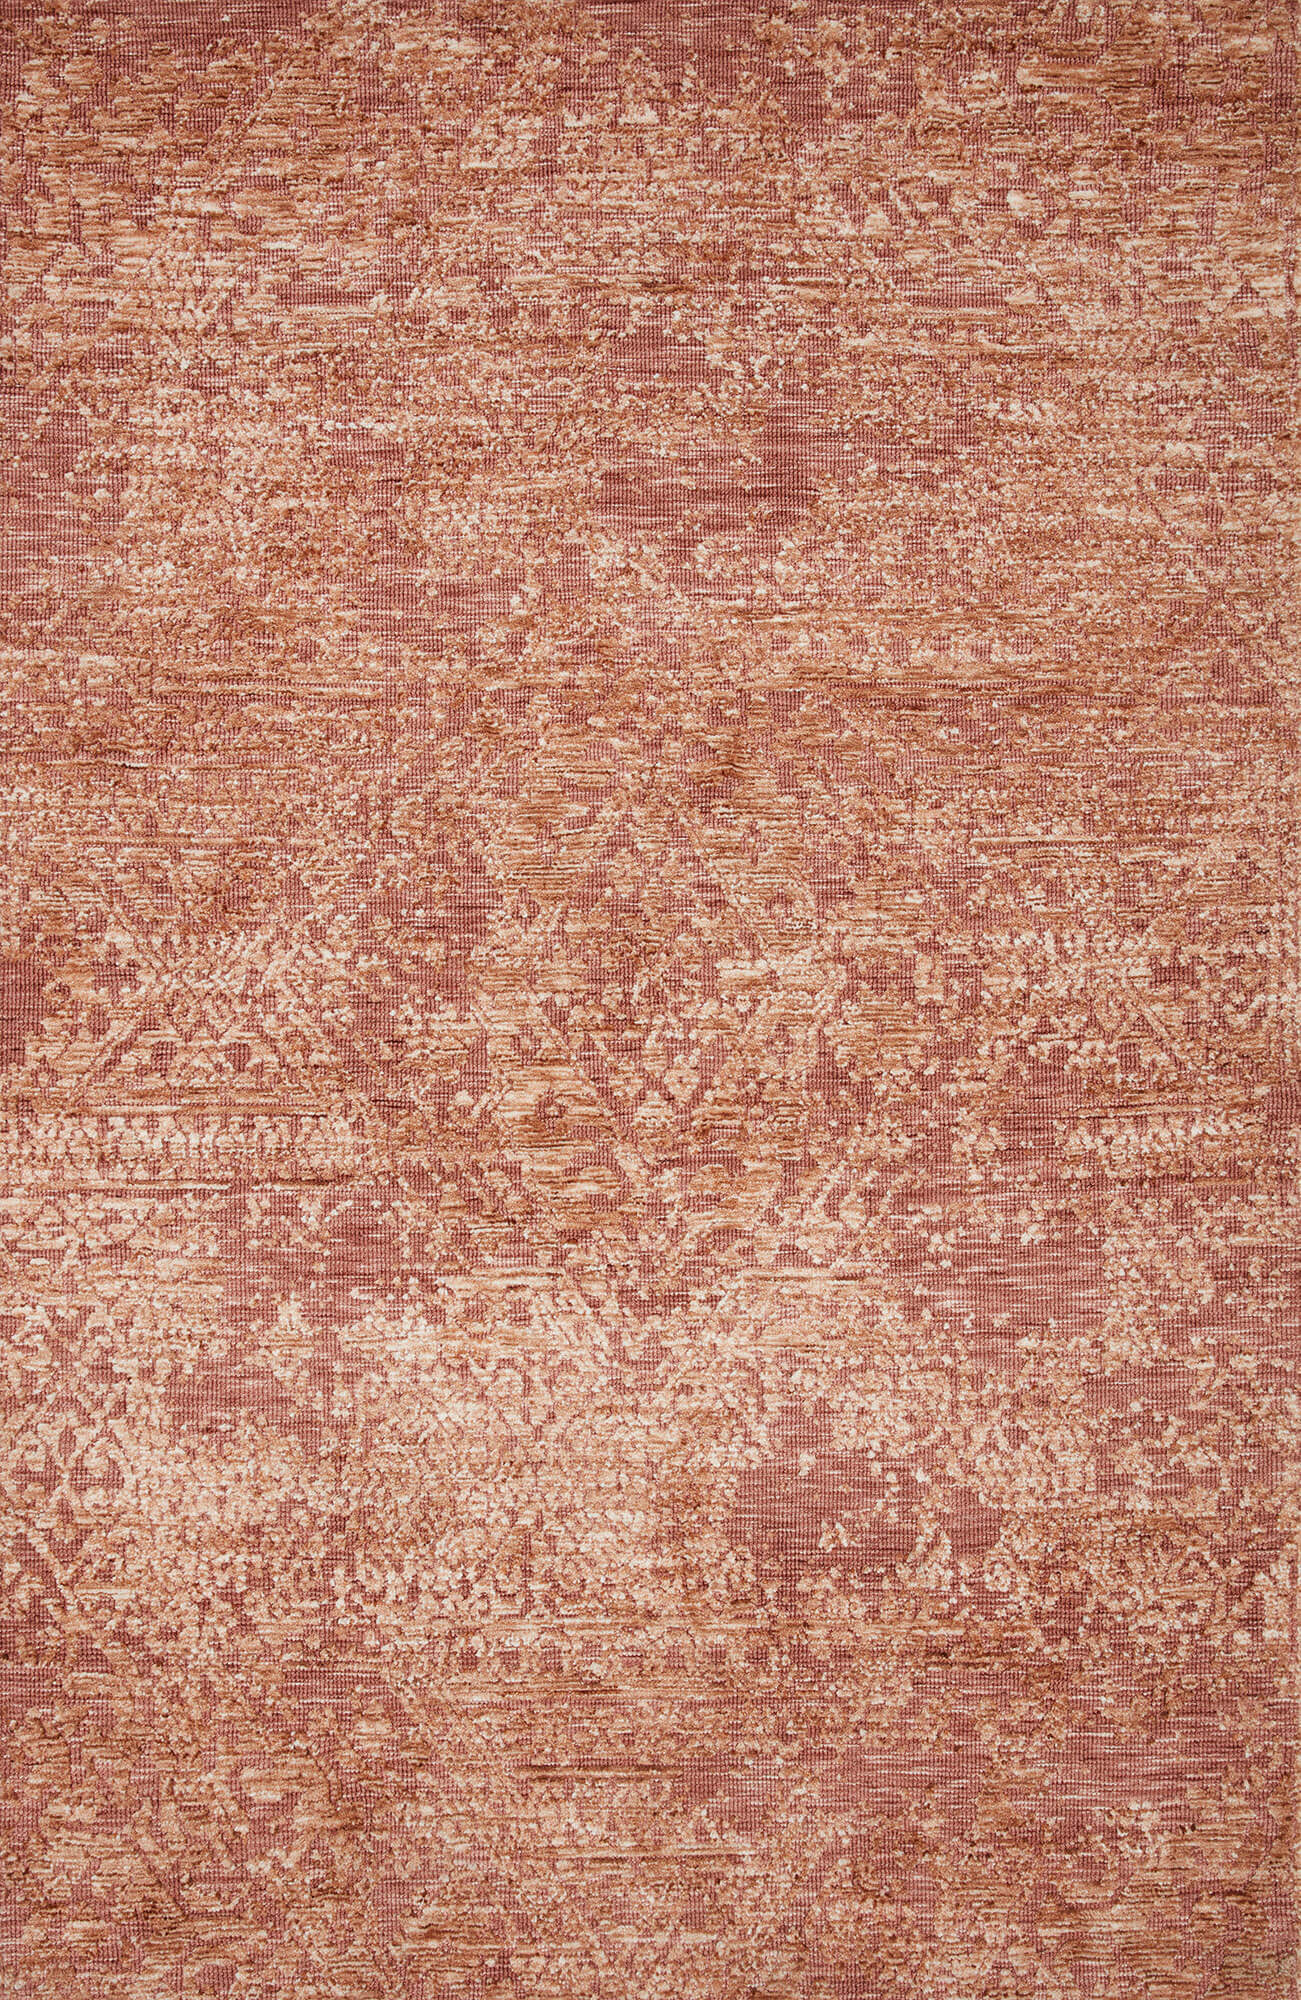 Magnolia Home By Joanna Gaines x Loloi Lindsay Rug - Pink & Coral